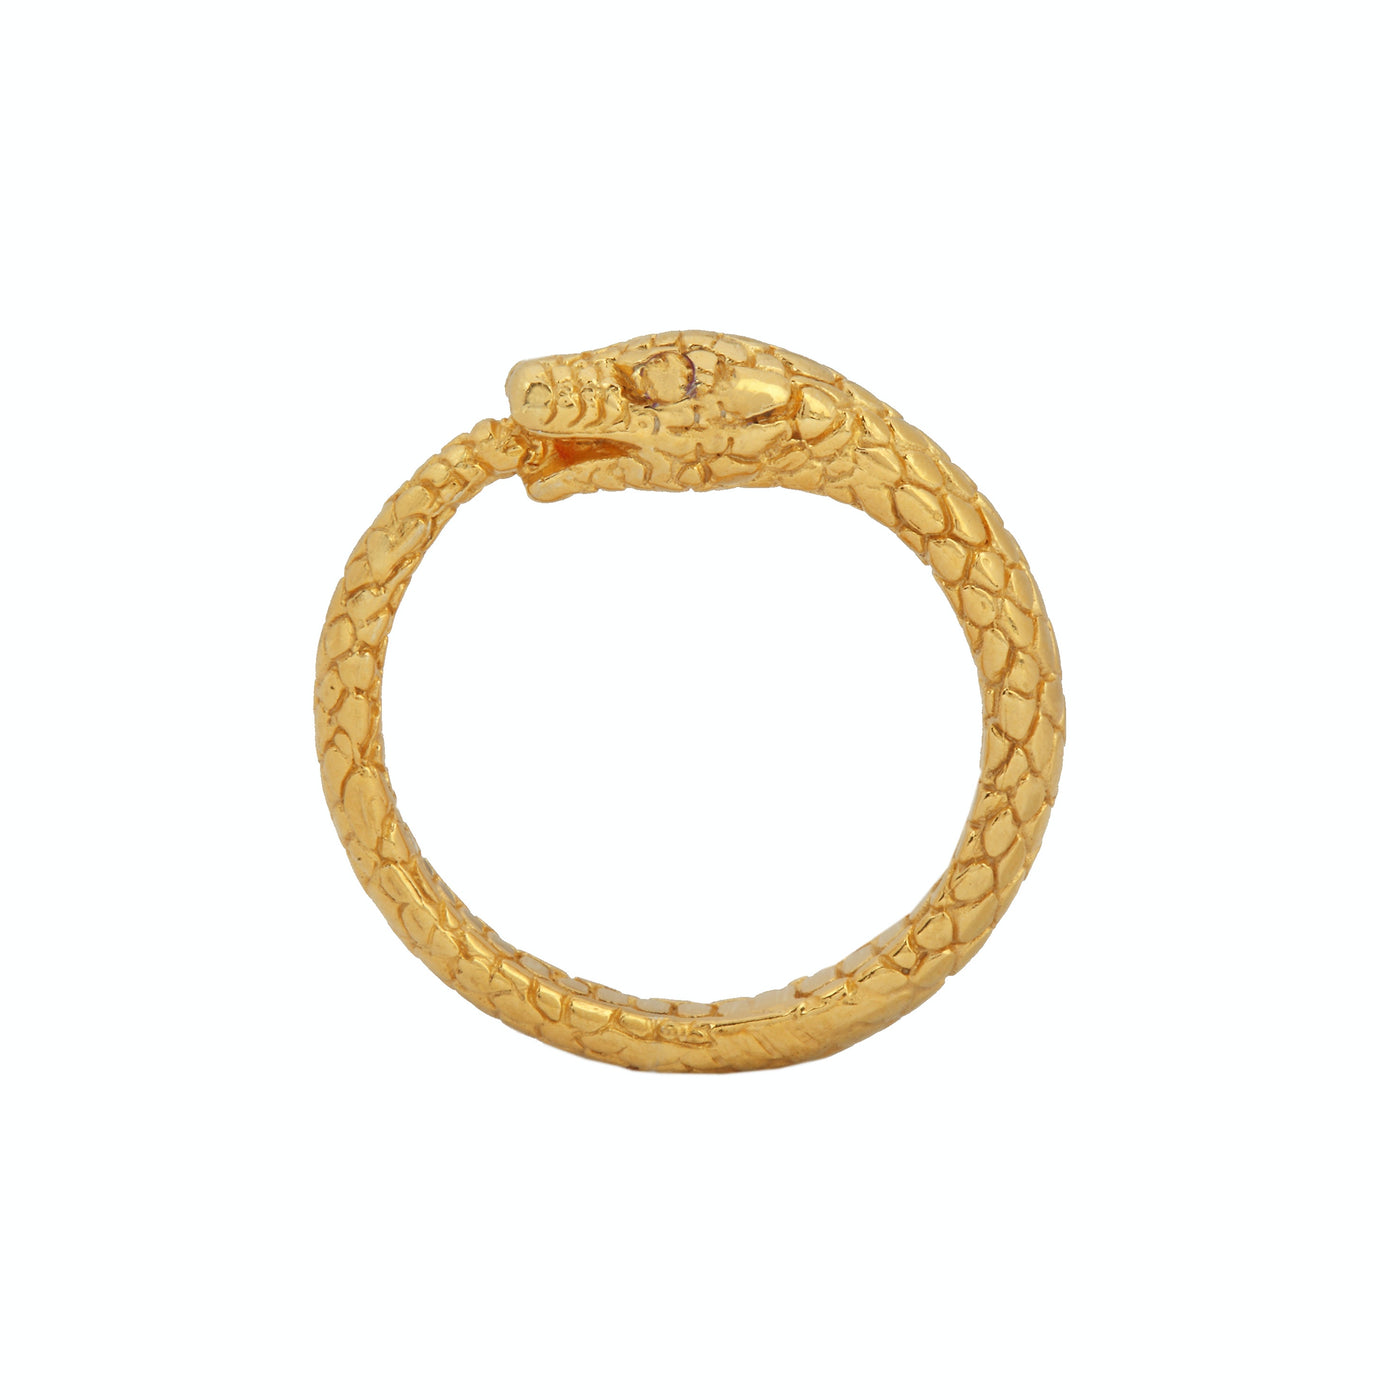 Solid gold Ring "Snake" without stones